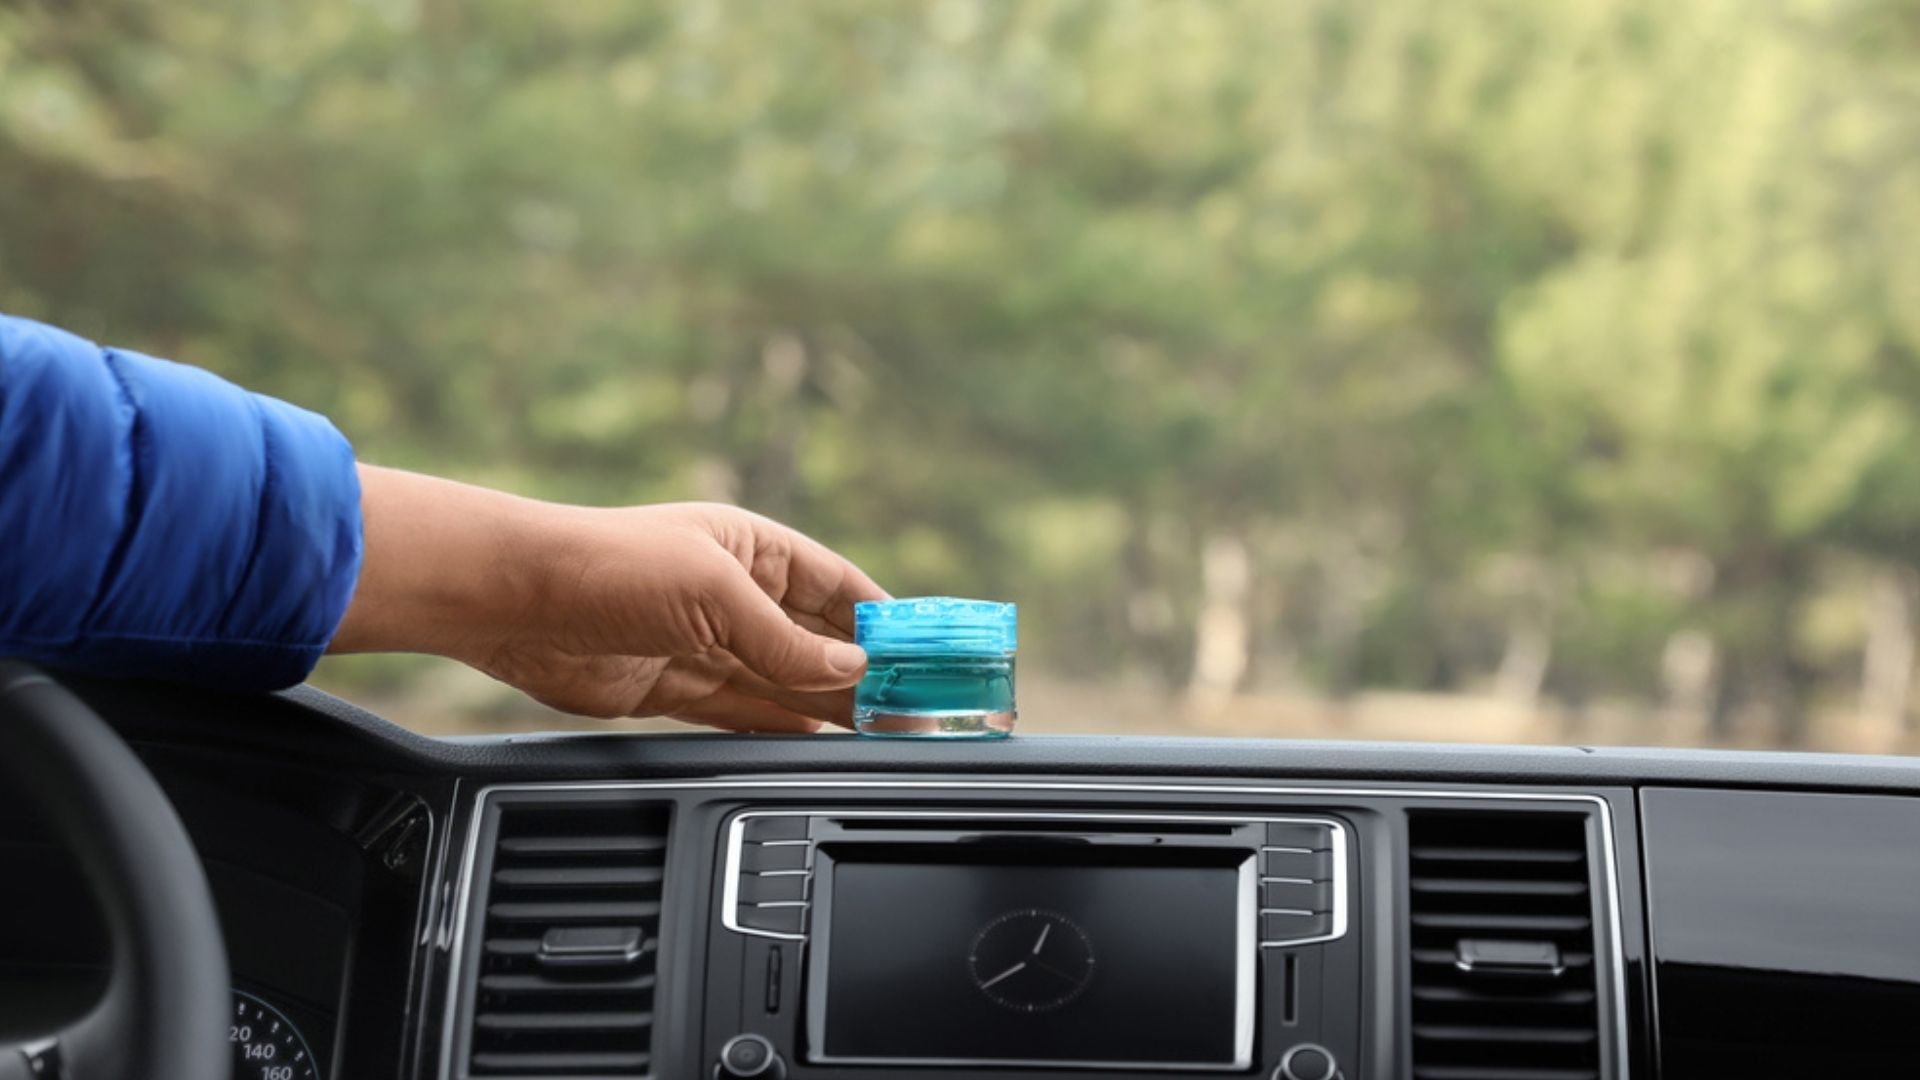 Best Air Freshener For Car: Kick-ass Tips To Buy One!